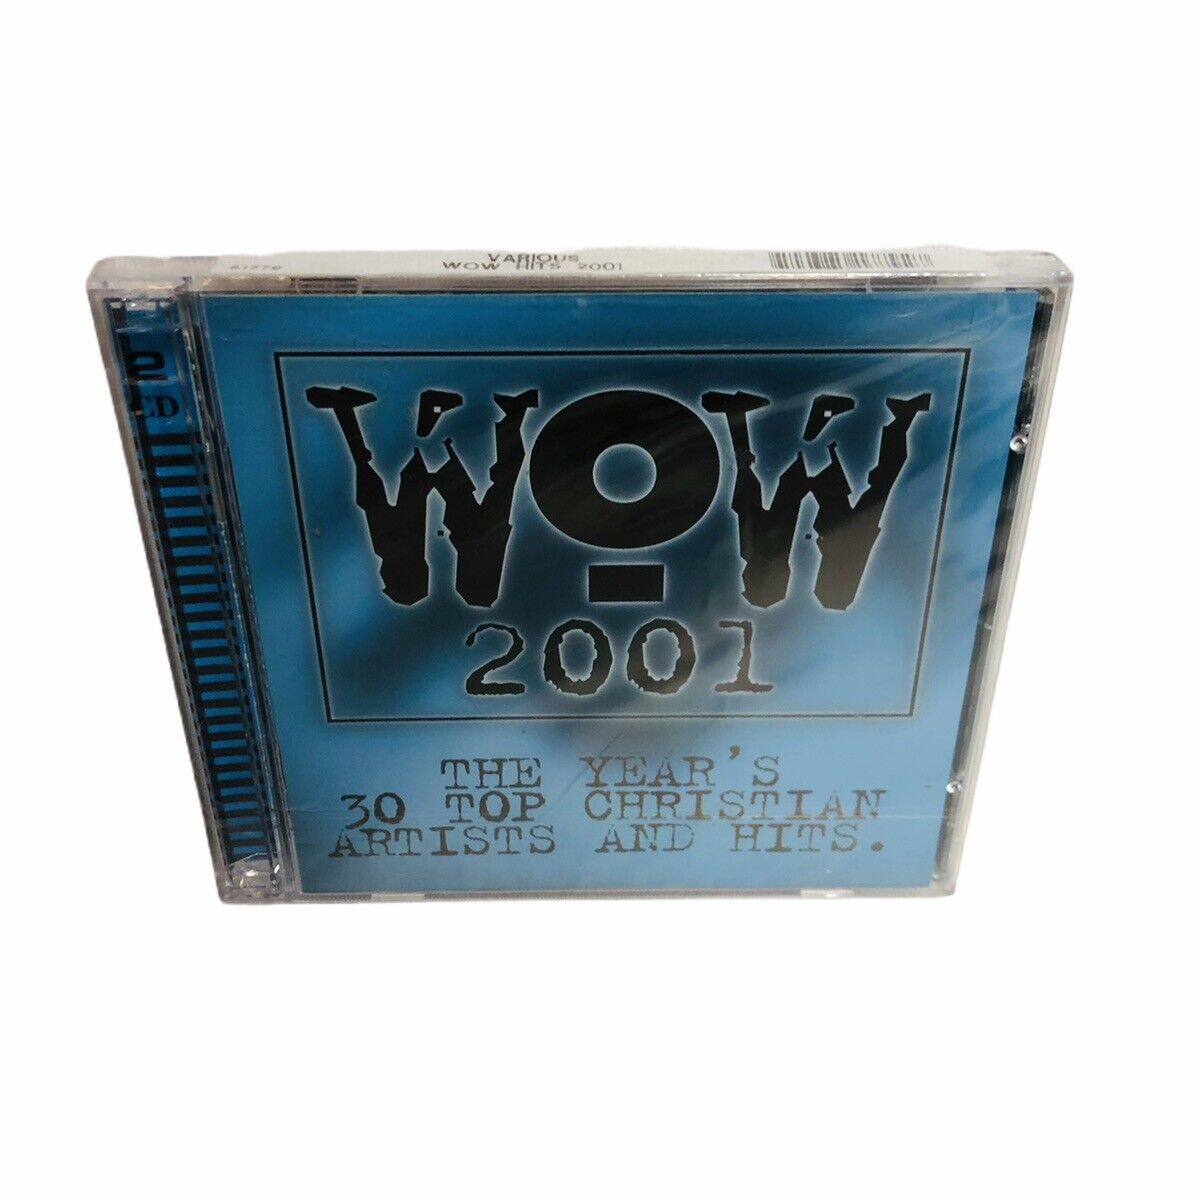 WOW 2001 by Various Artists (CD, Oct-2000, 2 Discs, Sparrow Records) Brand New 